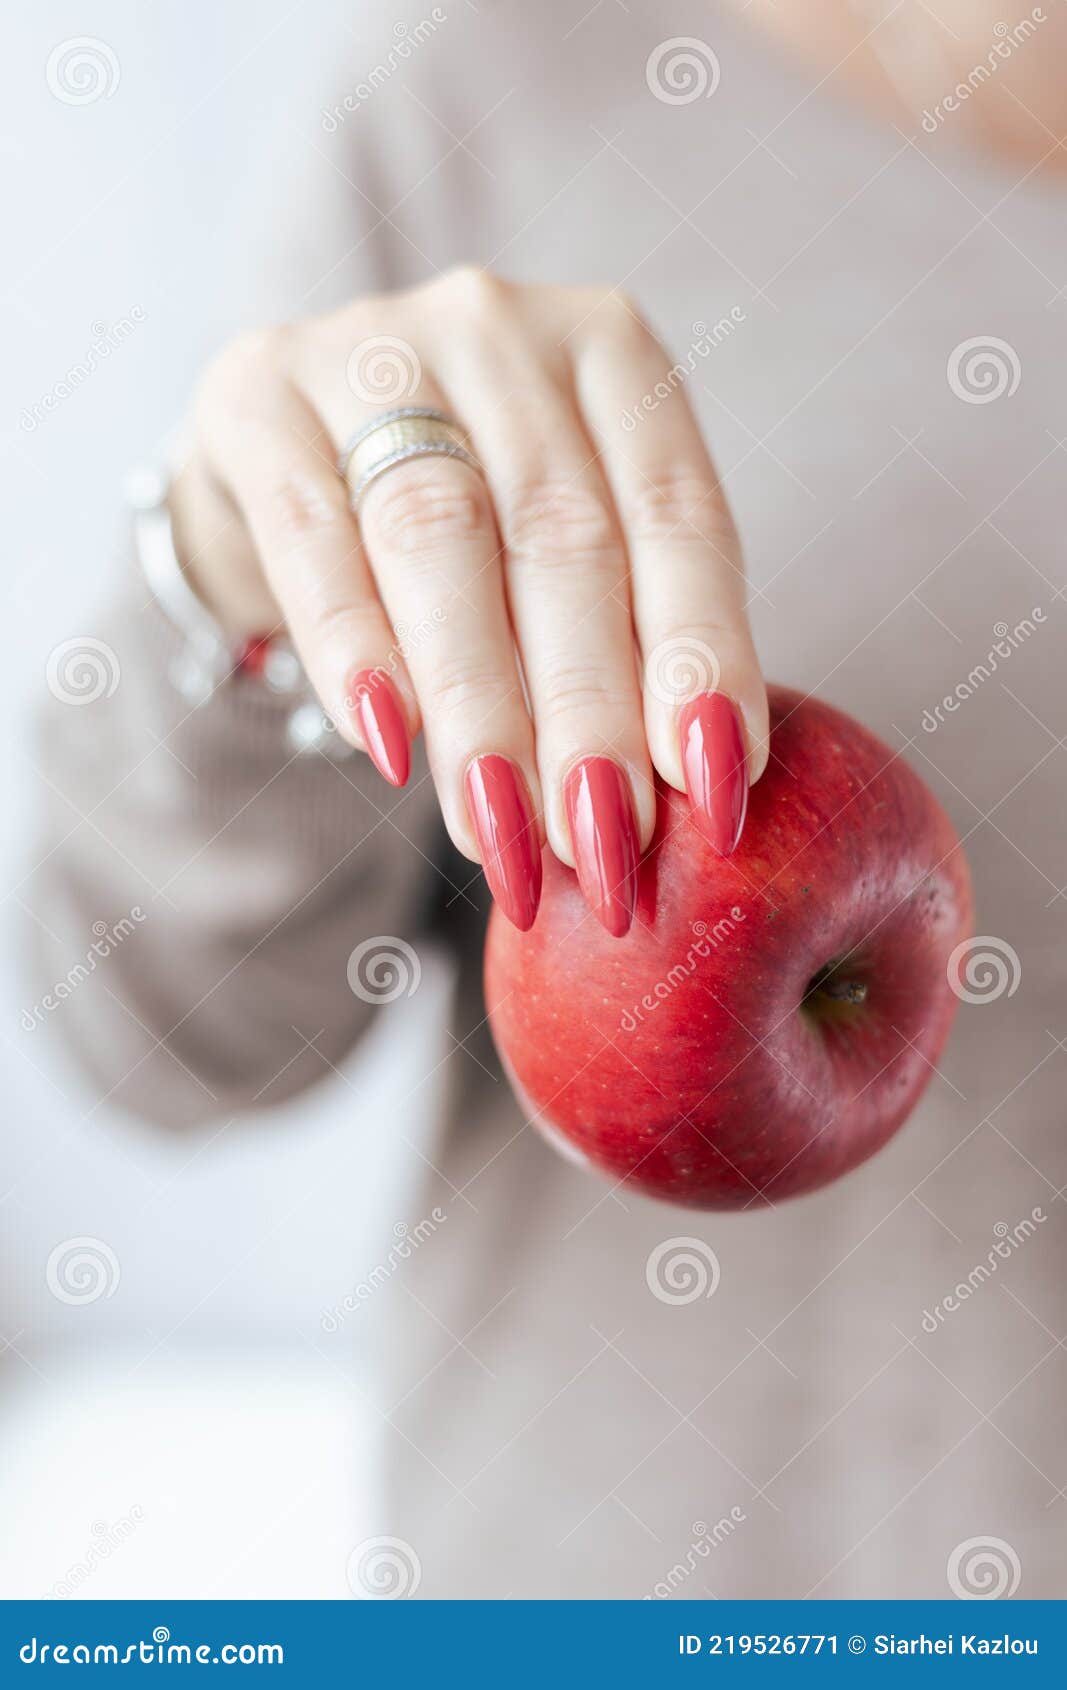 Female Hands with Red Nails are Holding a Ripe Red Apple Fruit. Stock ...